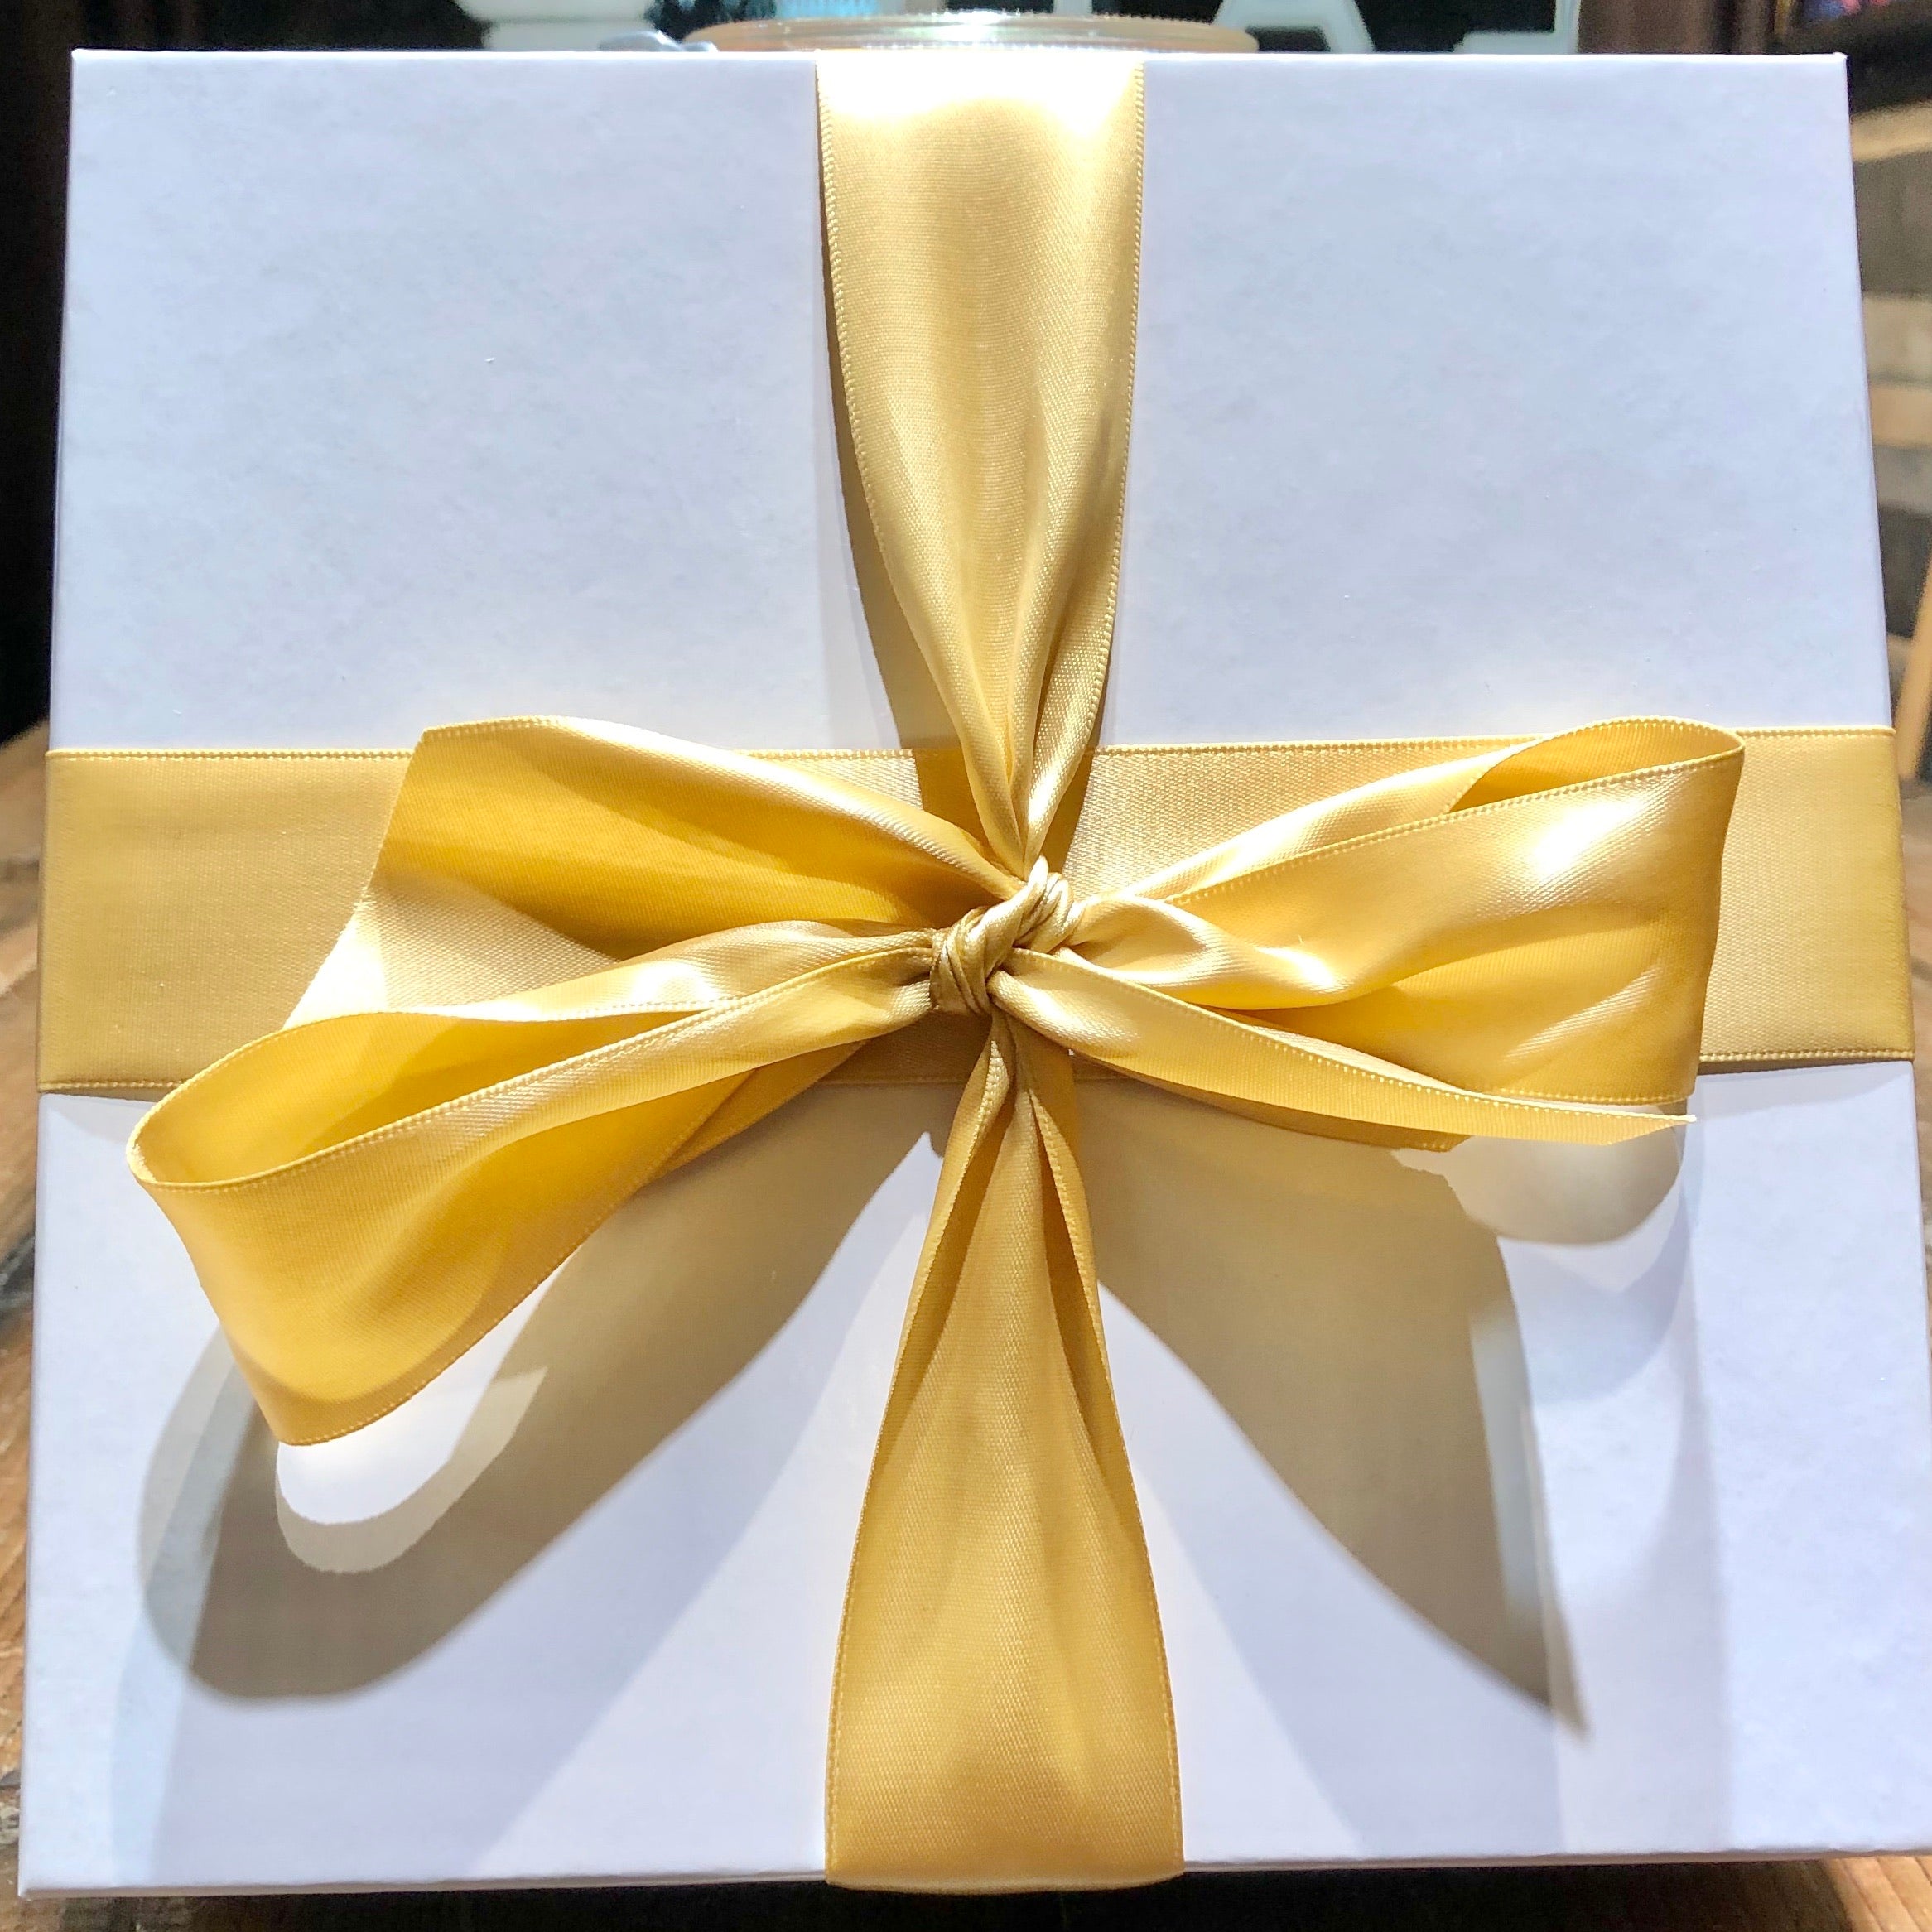 An image of a white gift box with gold ribbon